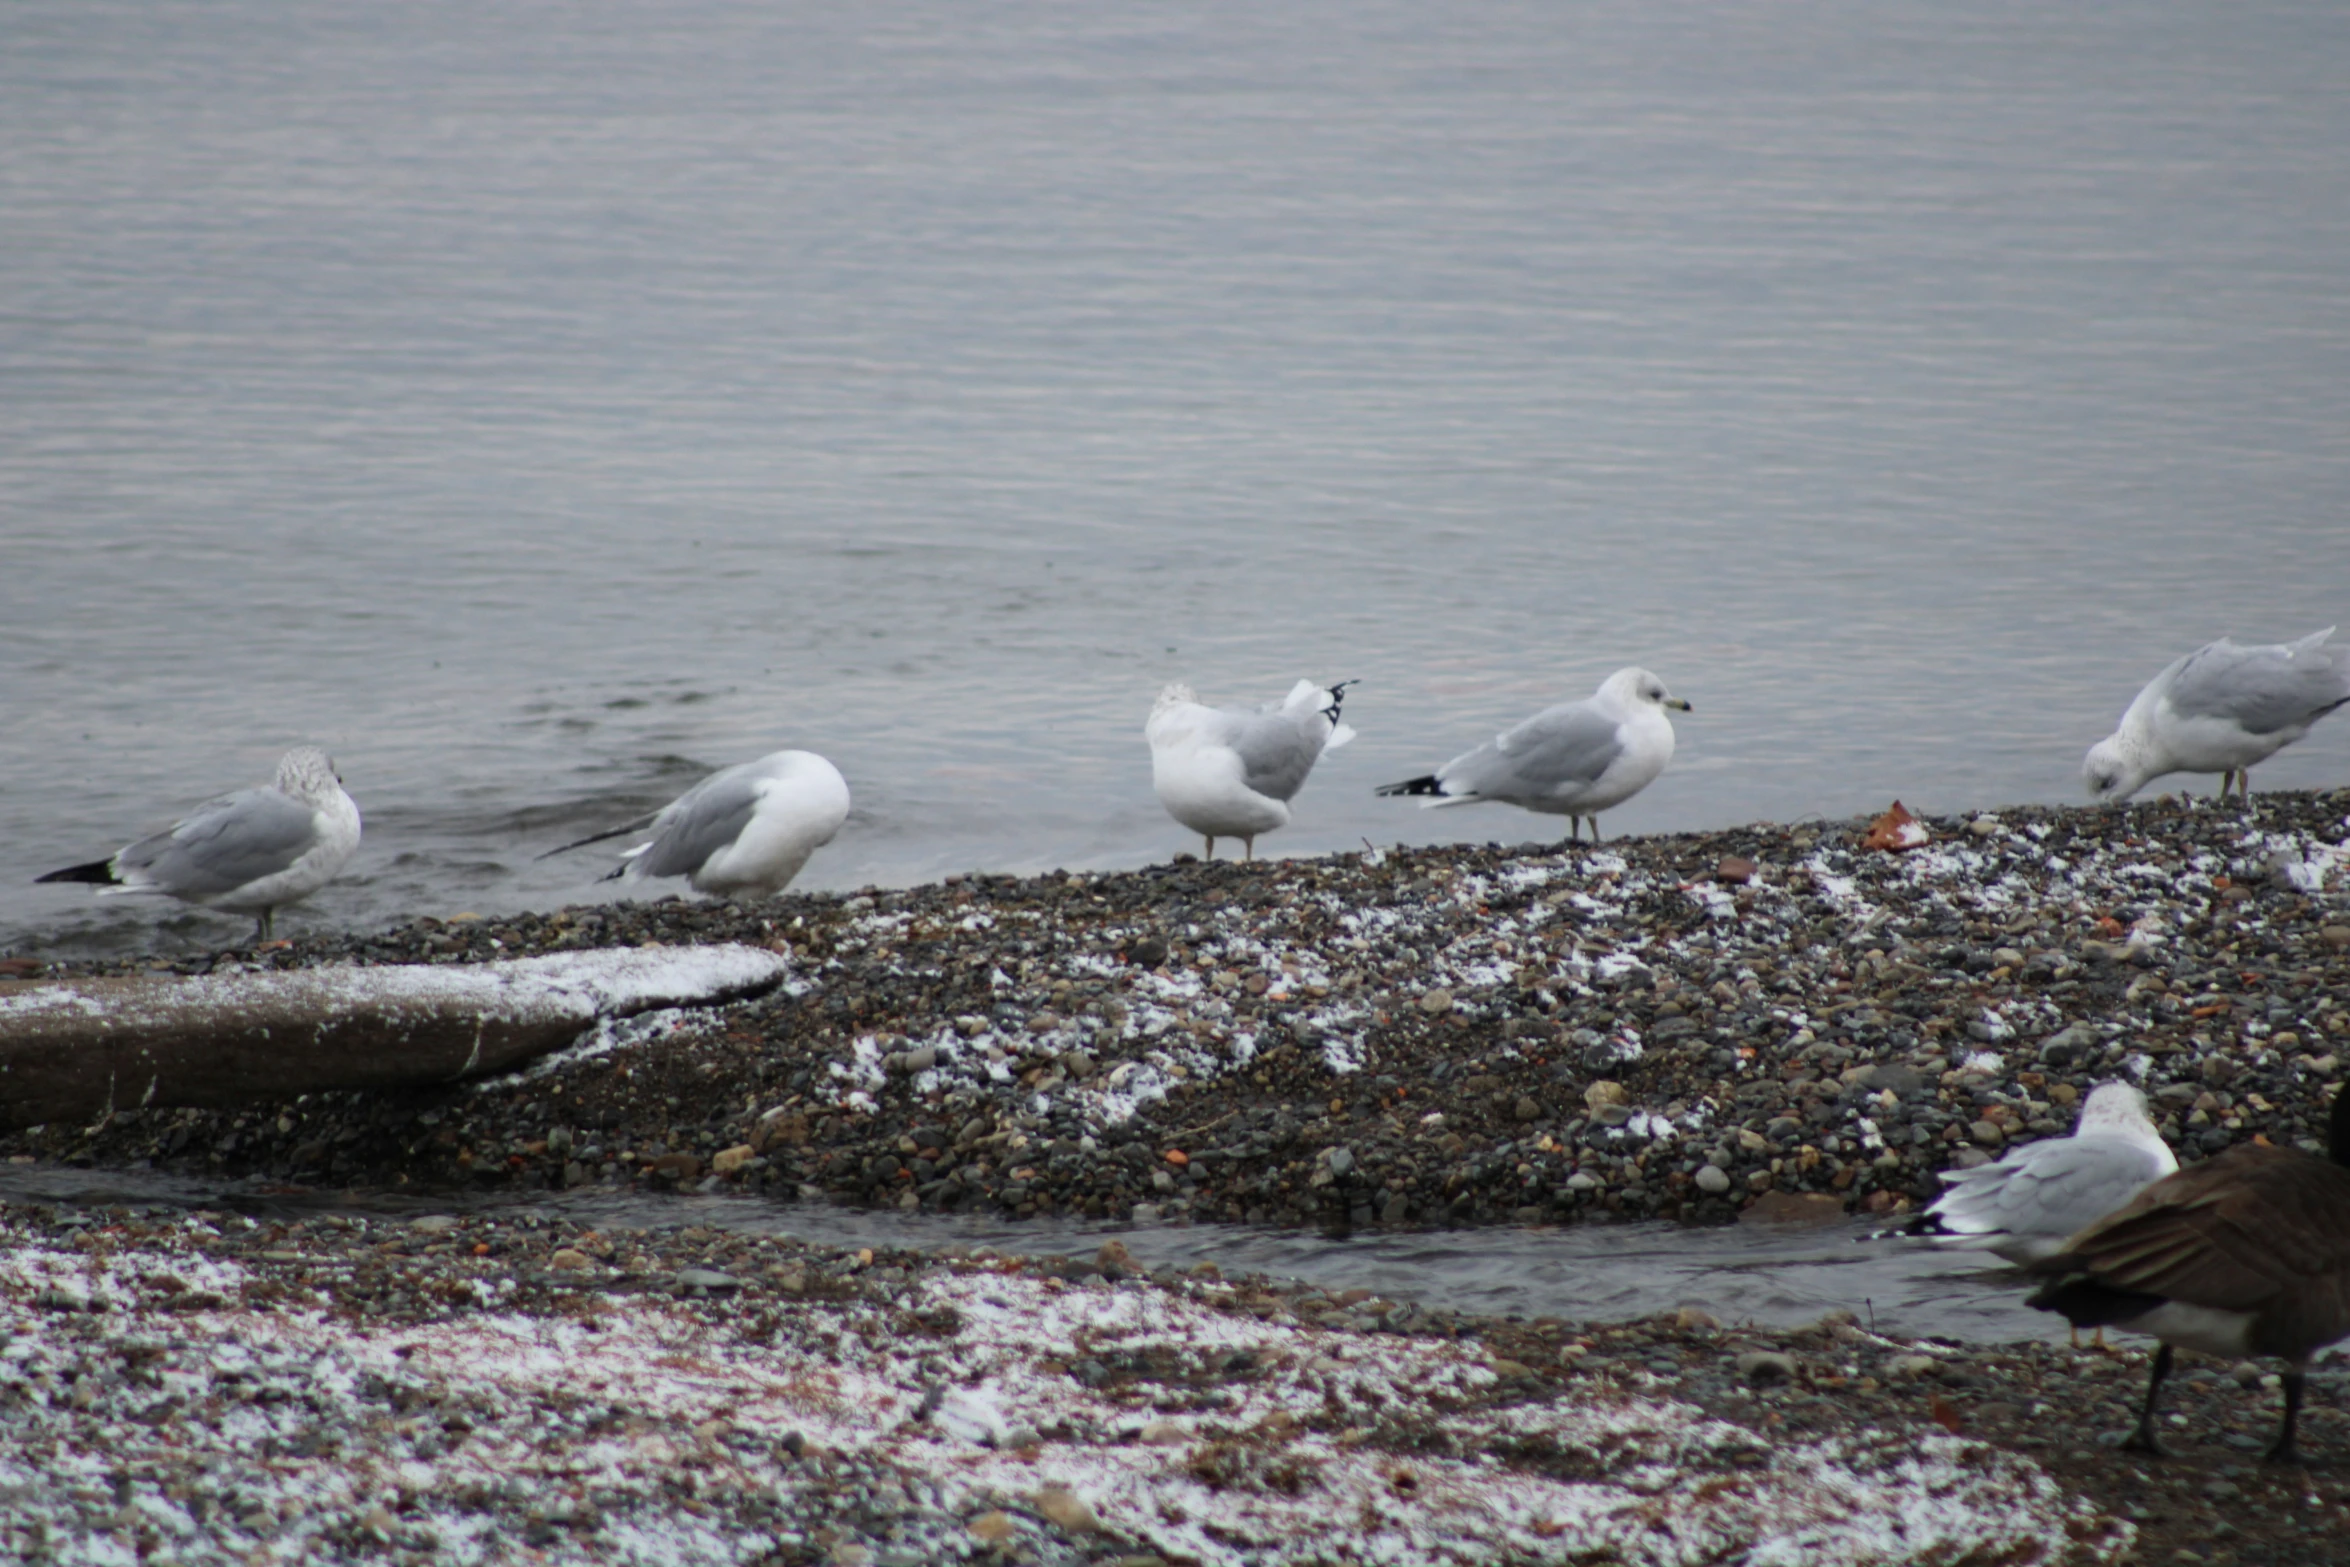 five seagulls are standing on the shoreline